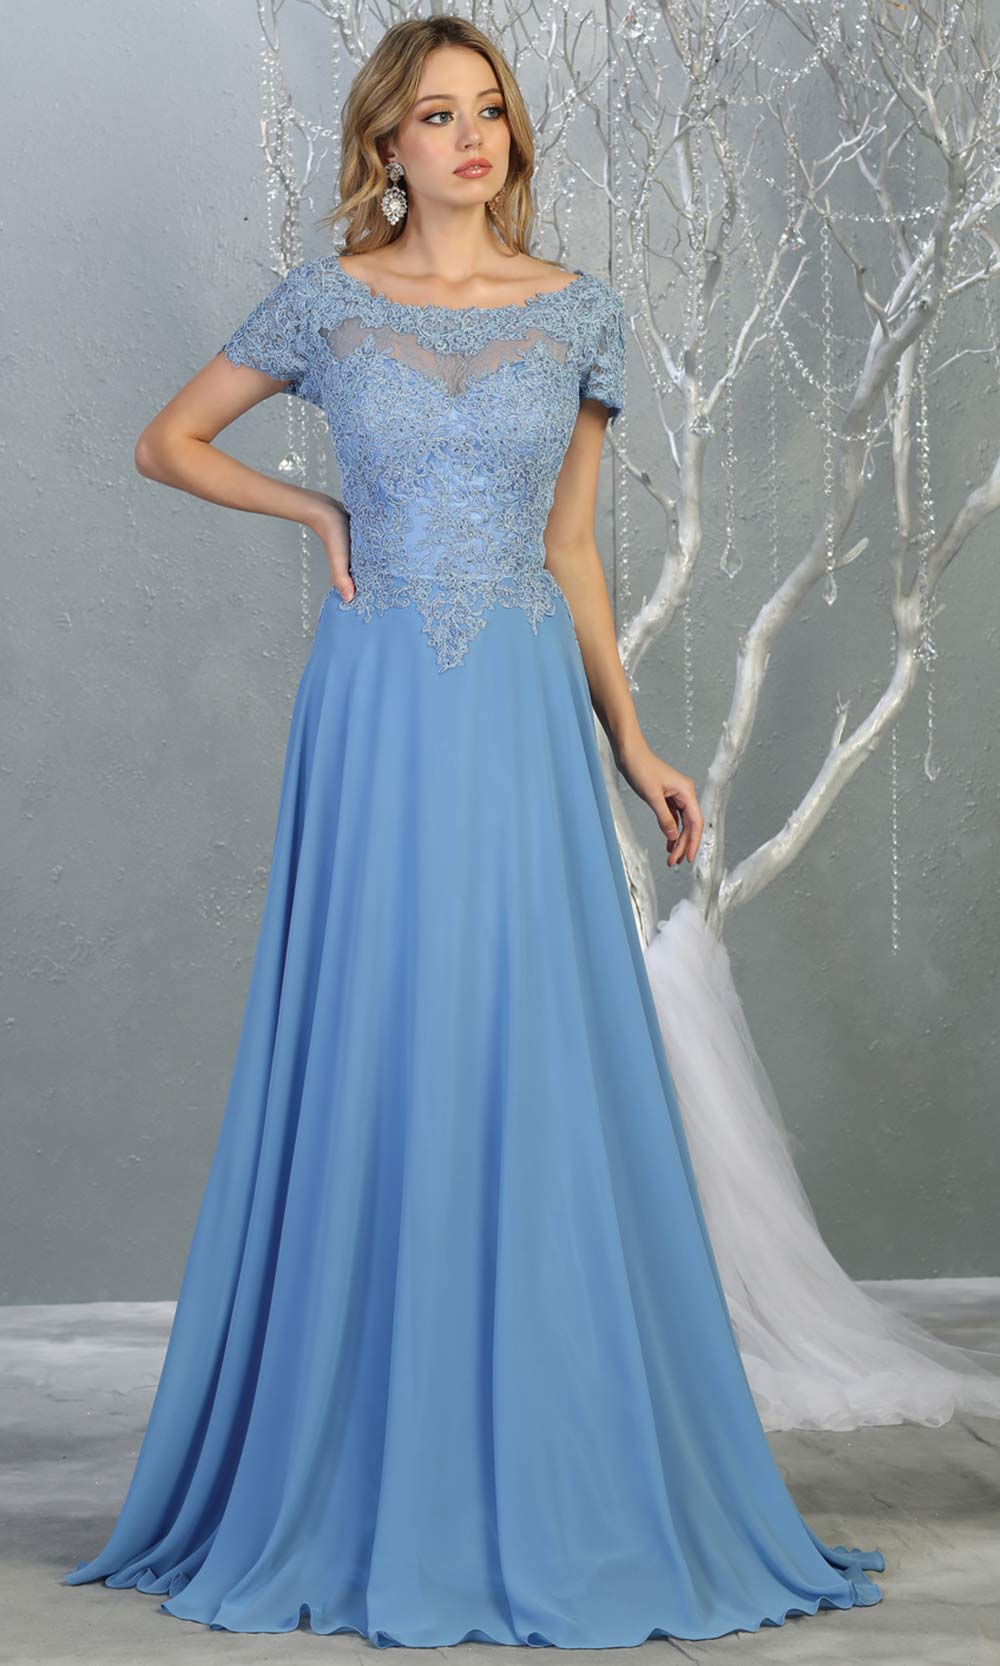 Mayqueen MQ1763 long perry blue flowy modest dress with cap sleeves & lace top. This light blue dress is perfect for mother of the bride, formal wedding guest dress, covered up evening dress. It has a high neck & high back. Plus sizes avail.jpg